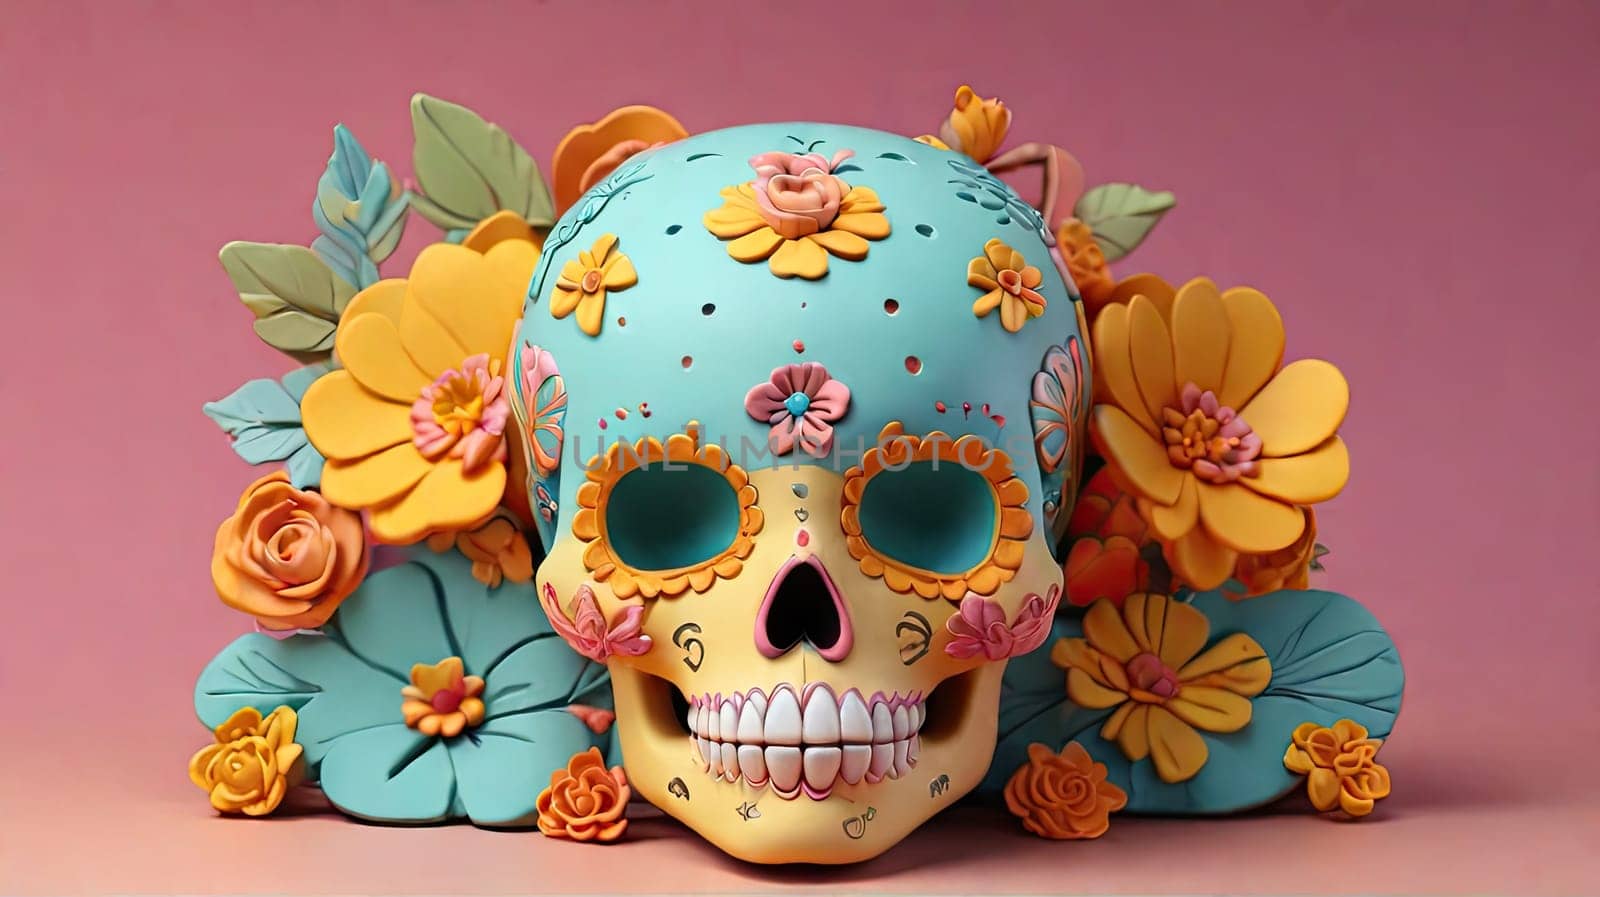 Sugar Skull with calendula flowers on a colored background. Day of the Dead holiday in Mexico. Skeleton bones of the human head. Respect for the memory of the ancestors of the dead. plasticine 3D